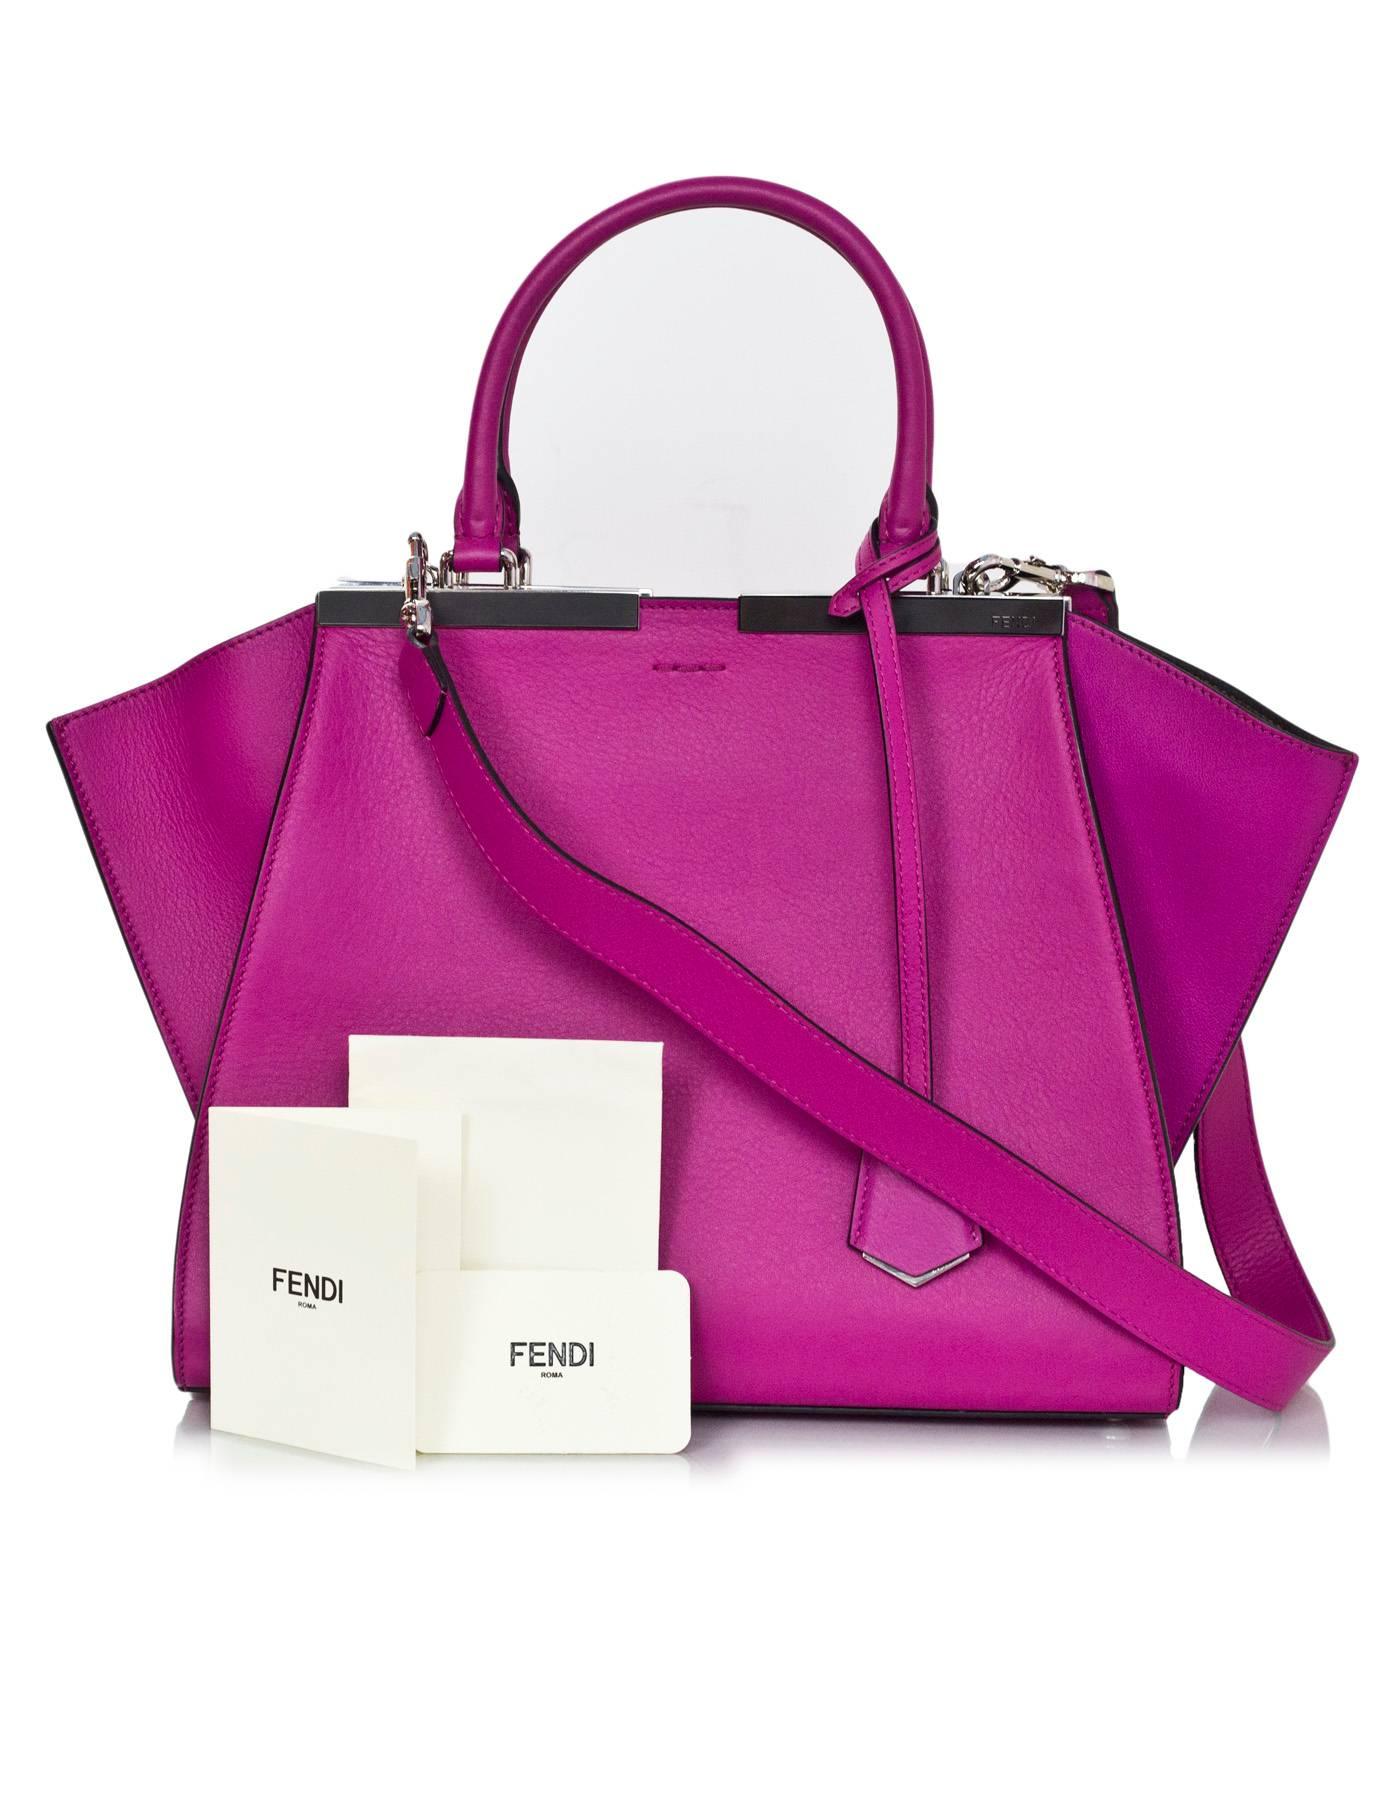 Fendi Pink Leather 3Jours Handle Bag with Tags rt. $2, 400 6